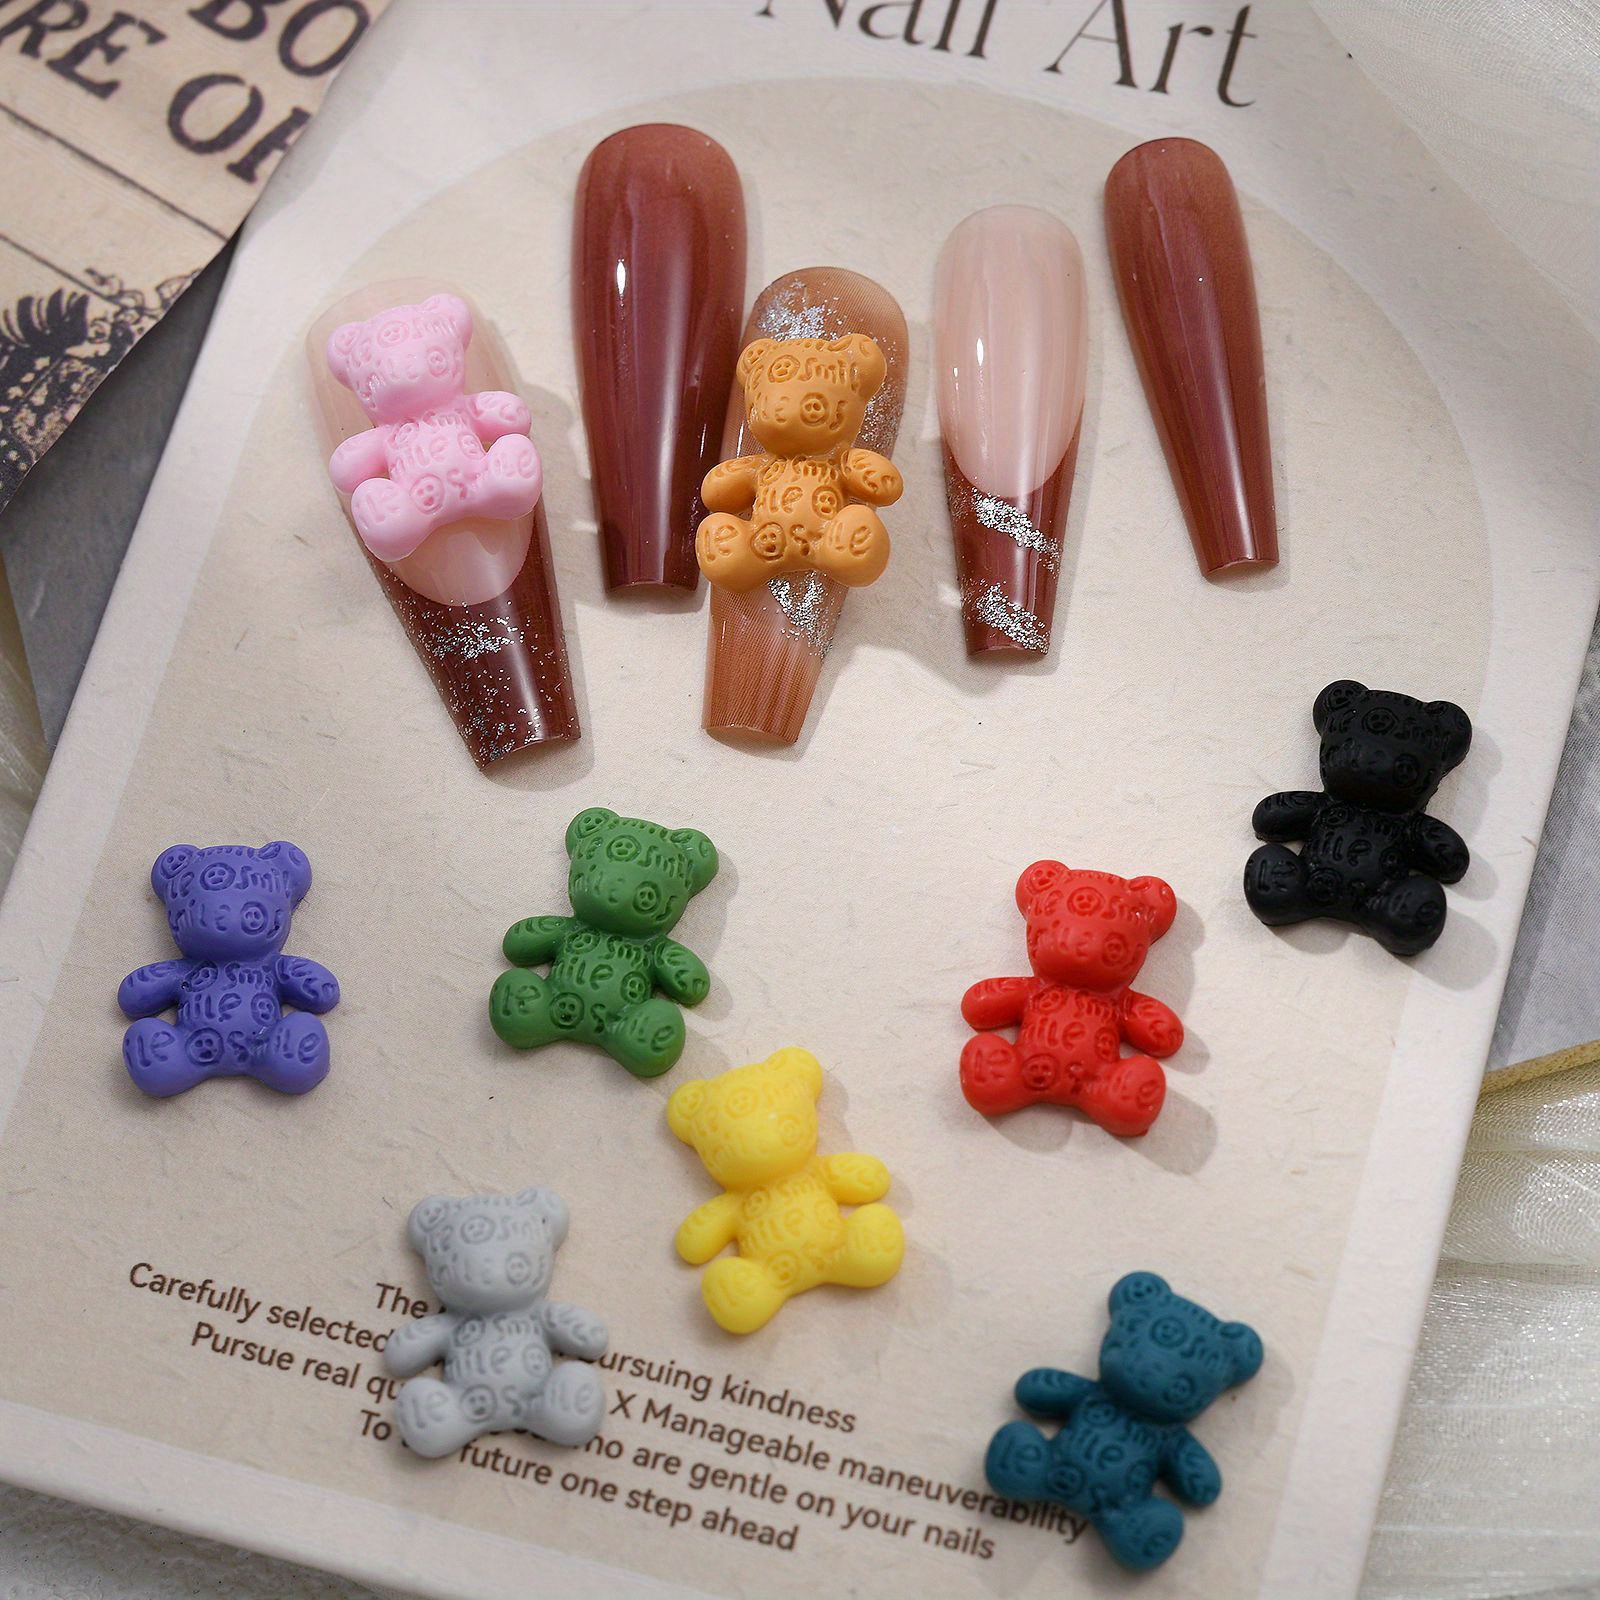 10 pcs Cute 3D Clear Brown Bear Nail Charms with Black Bow Design - Perfect  for Nail Art DIY and Manicures